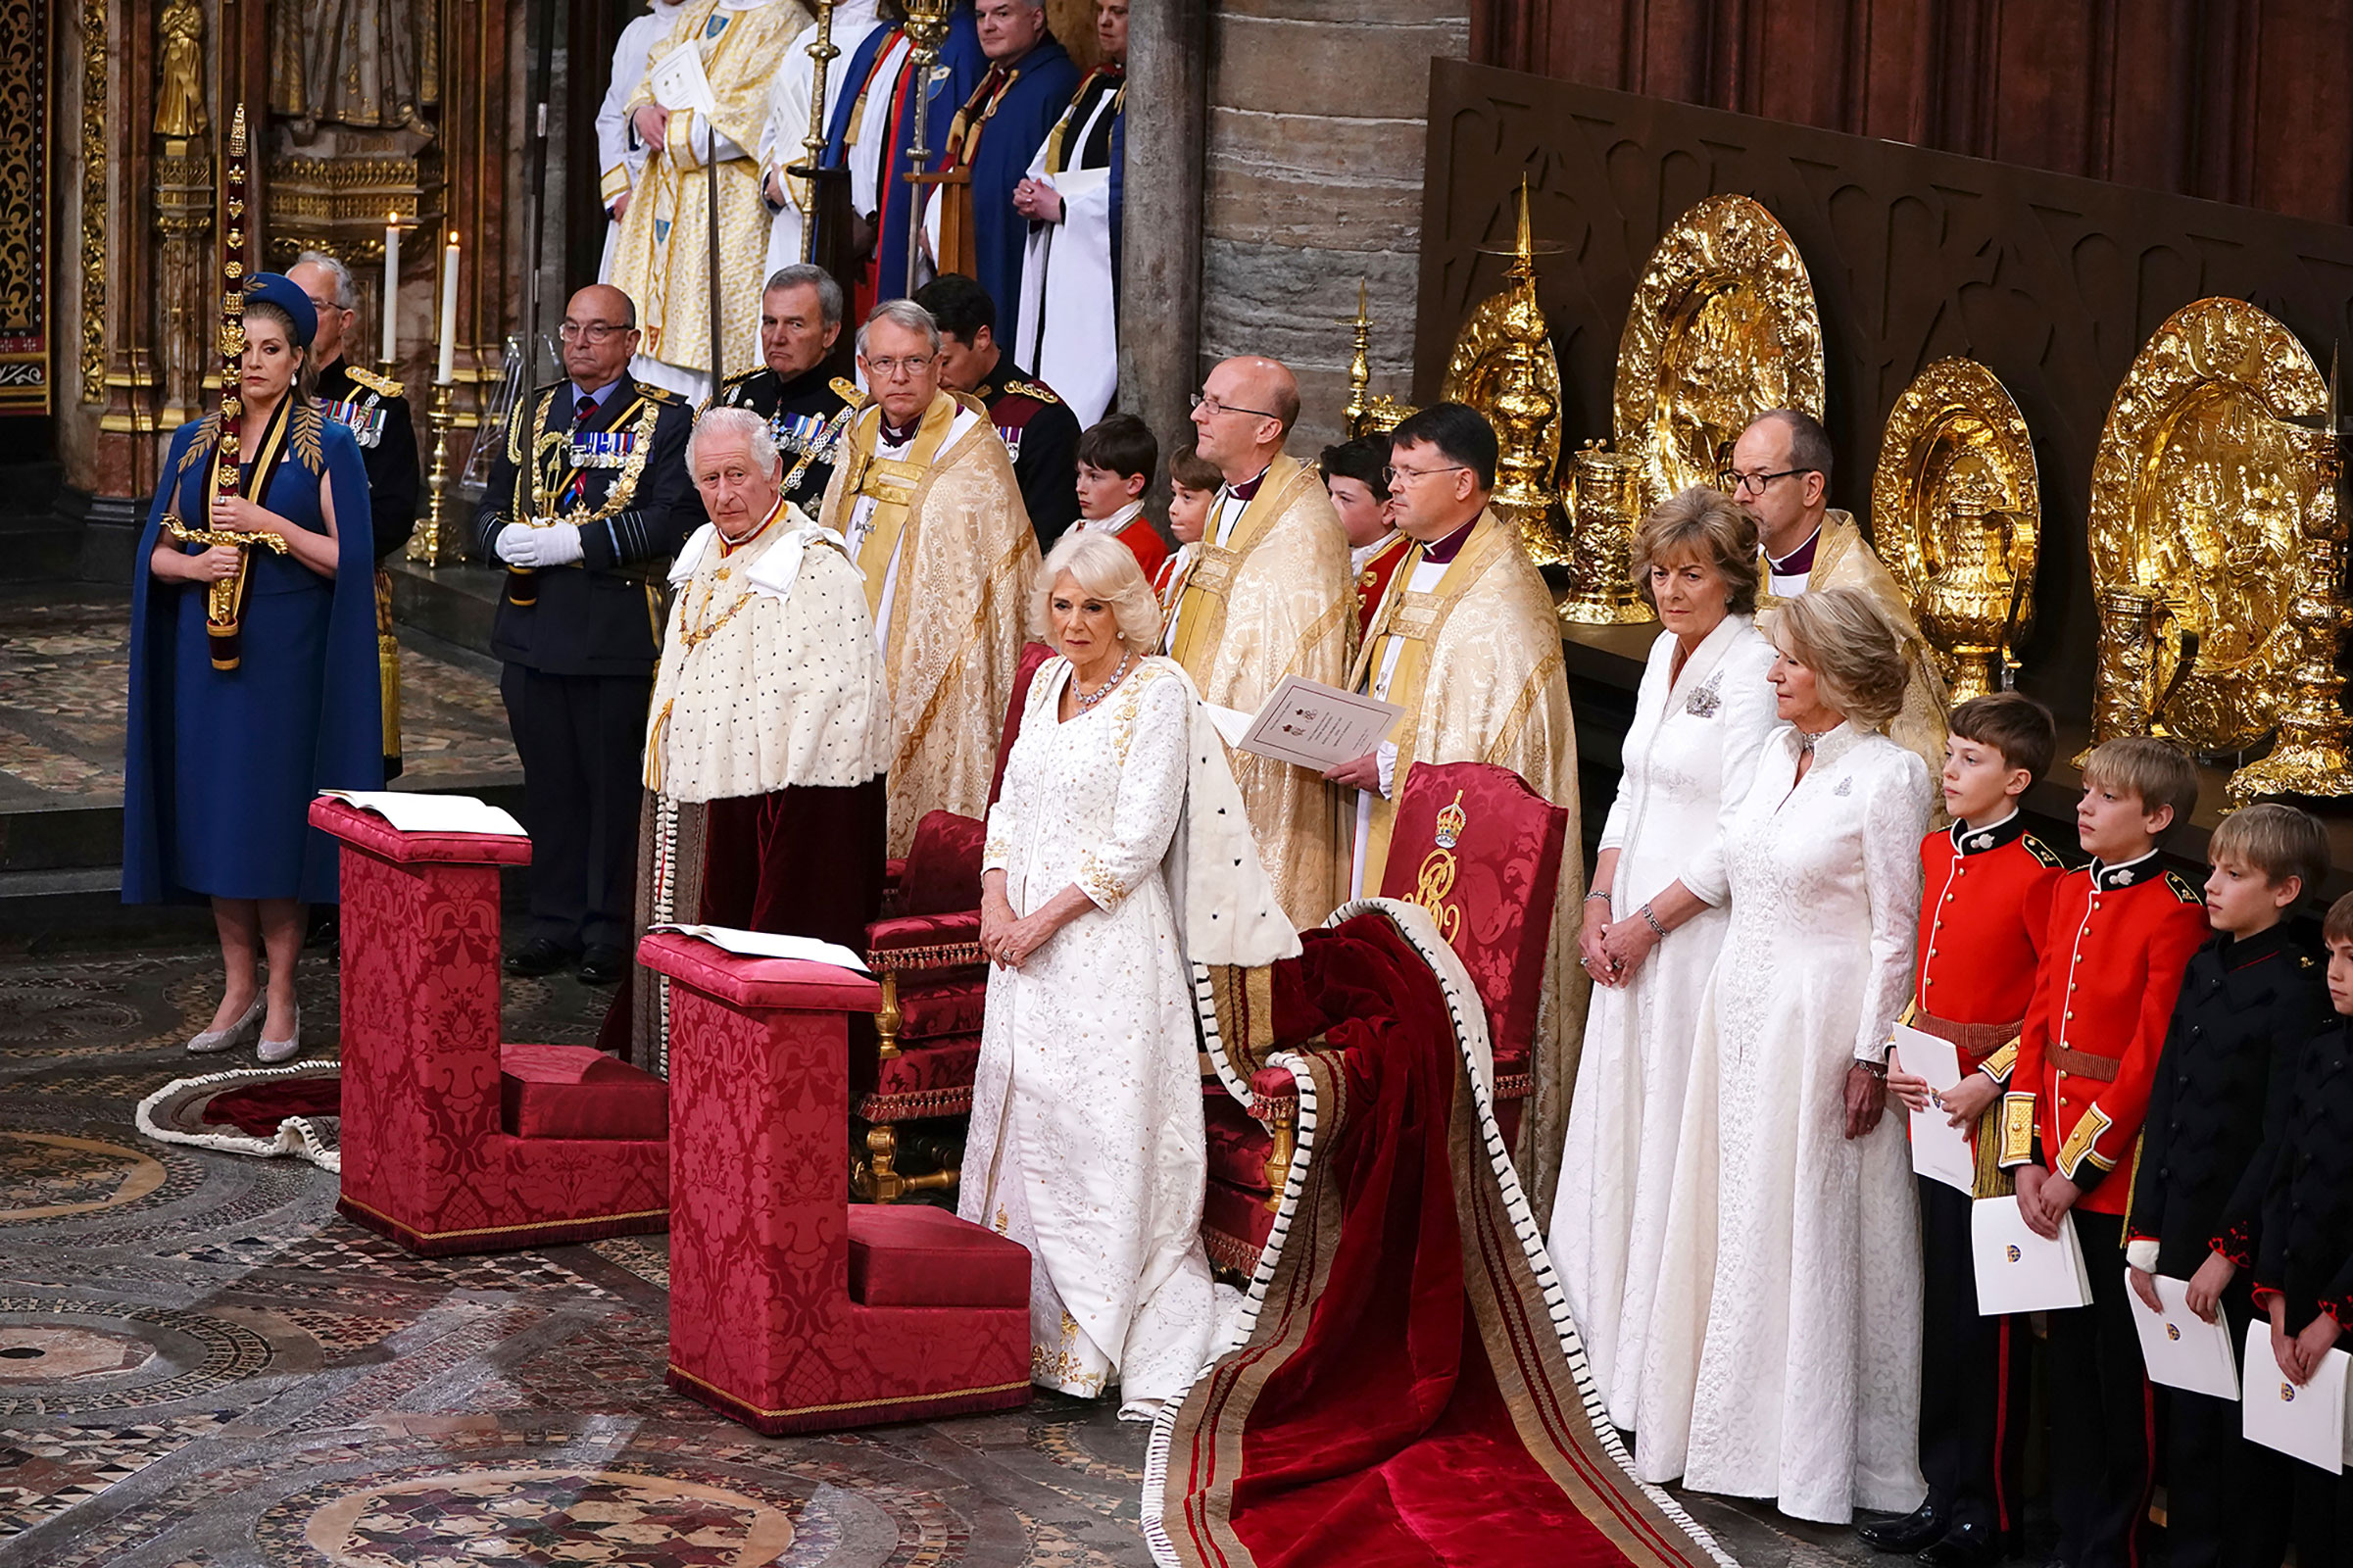 The King and Queen Camilla take part in the coronation ceremony.